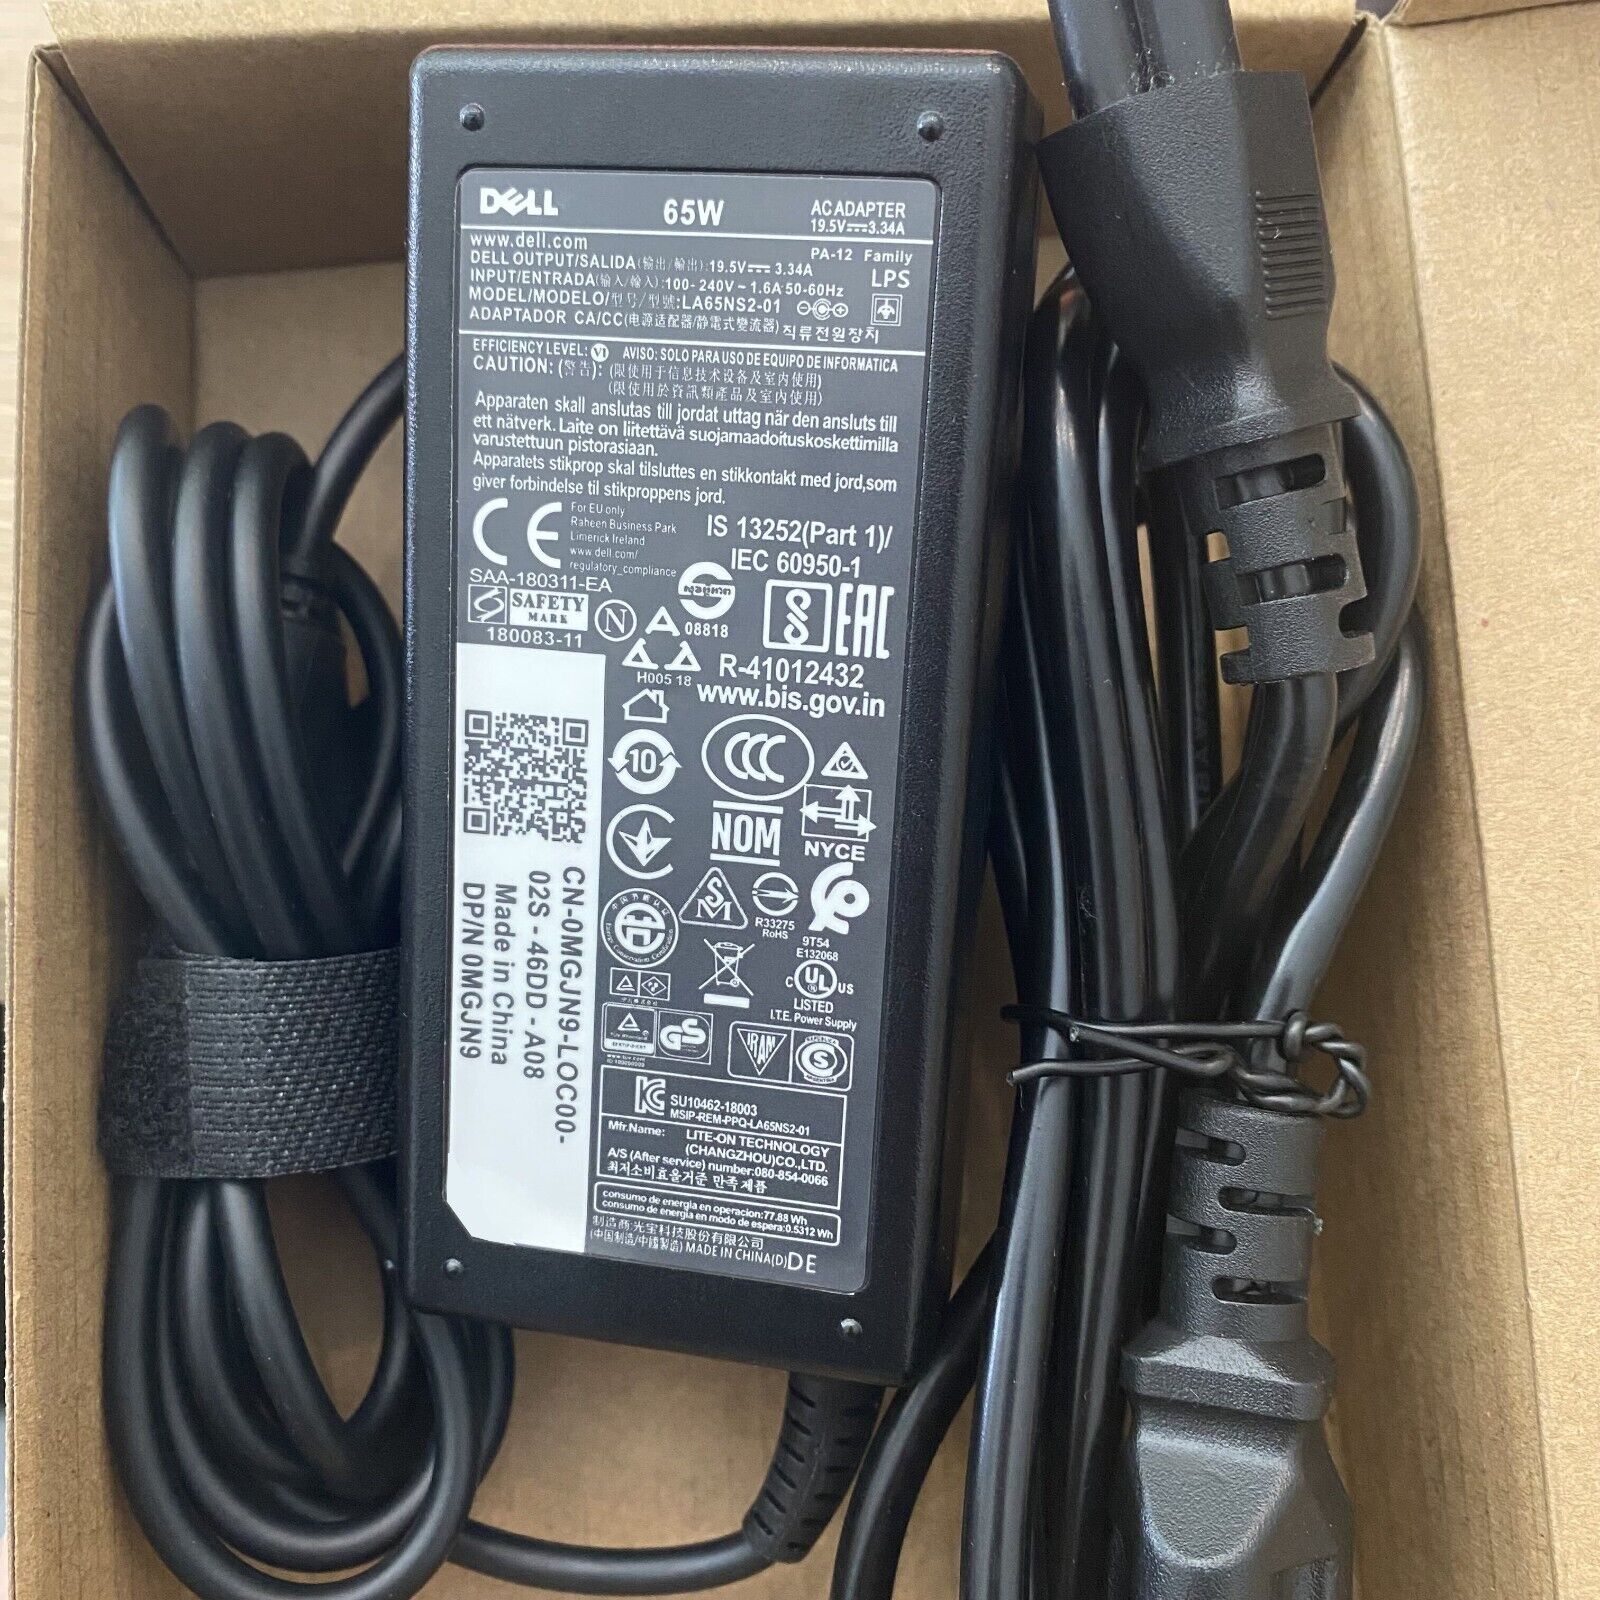 OEM 65W Adapter Charger for Dell Inspiron 15-5567 5565 P66F 19.5V 3.34A 4.5*3.0m